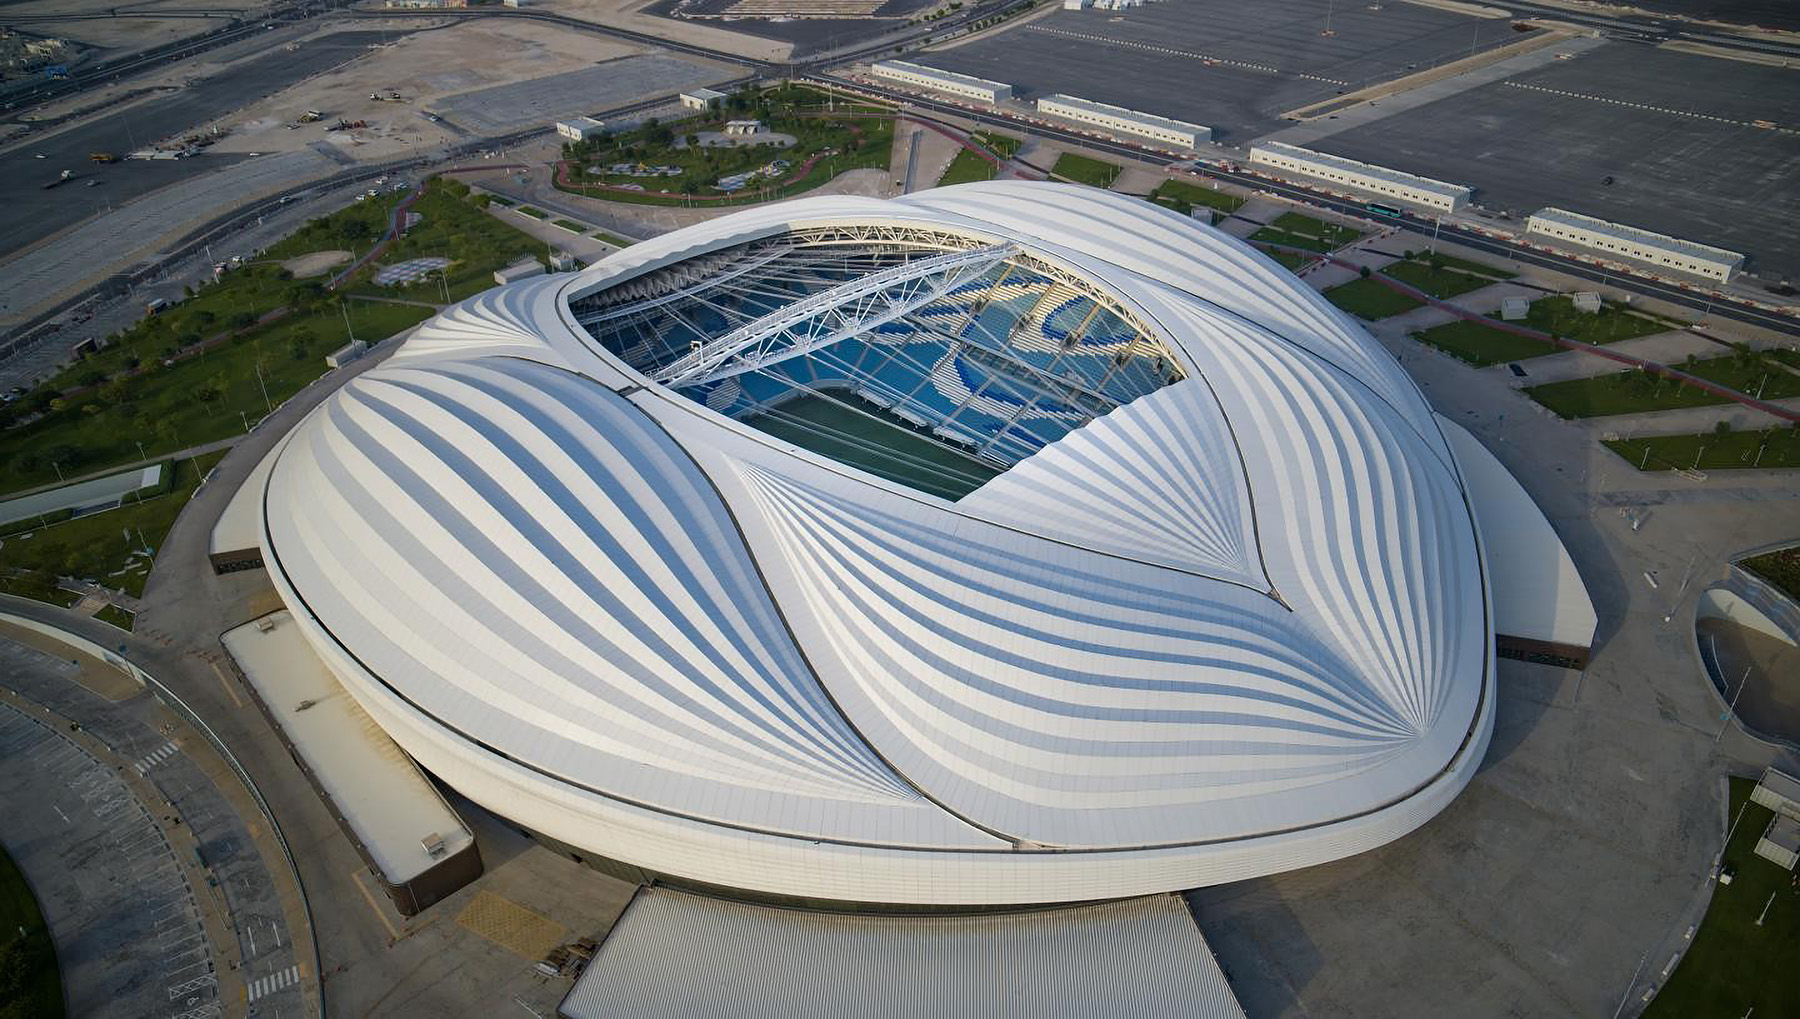 The photograph shows an aerial view of the Al Janoub Stadium roof. 